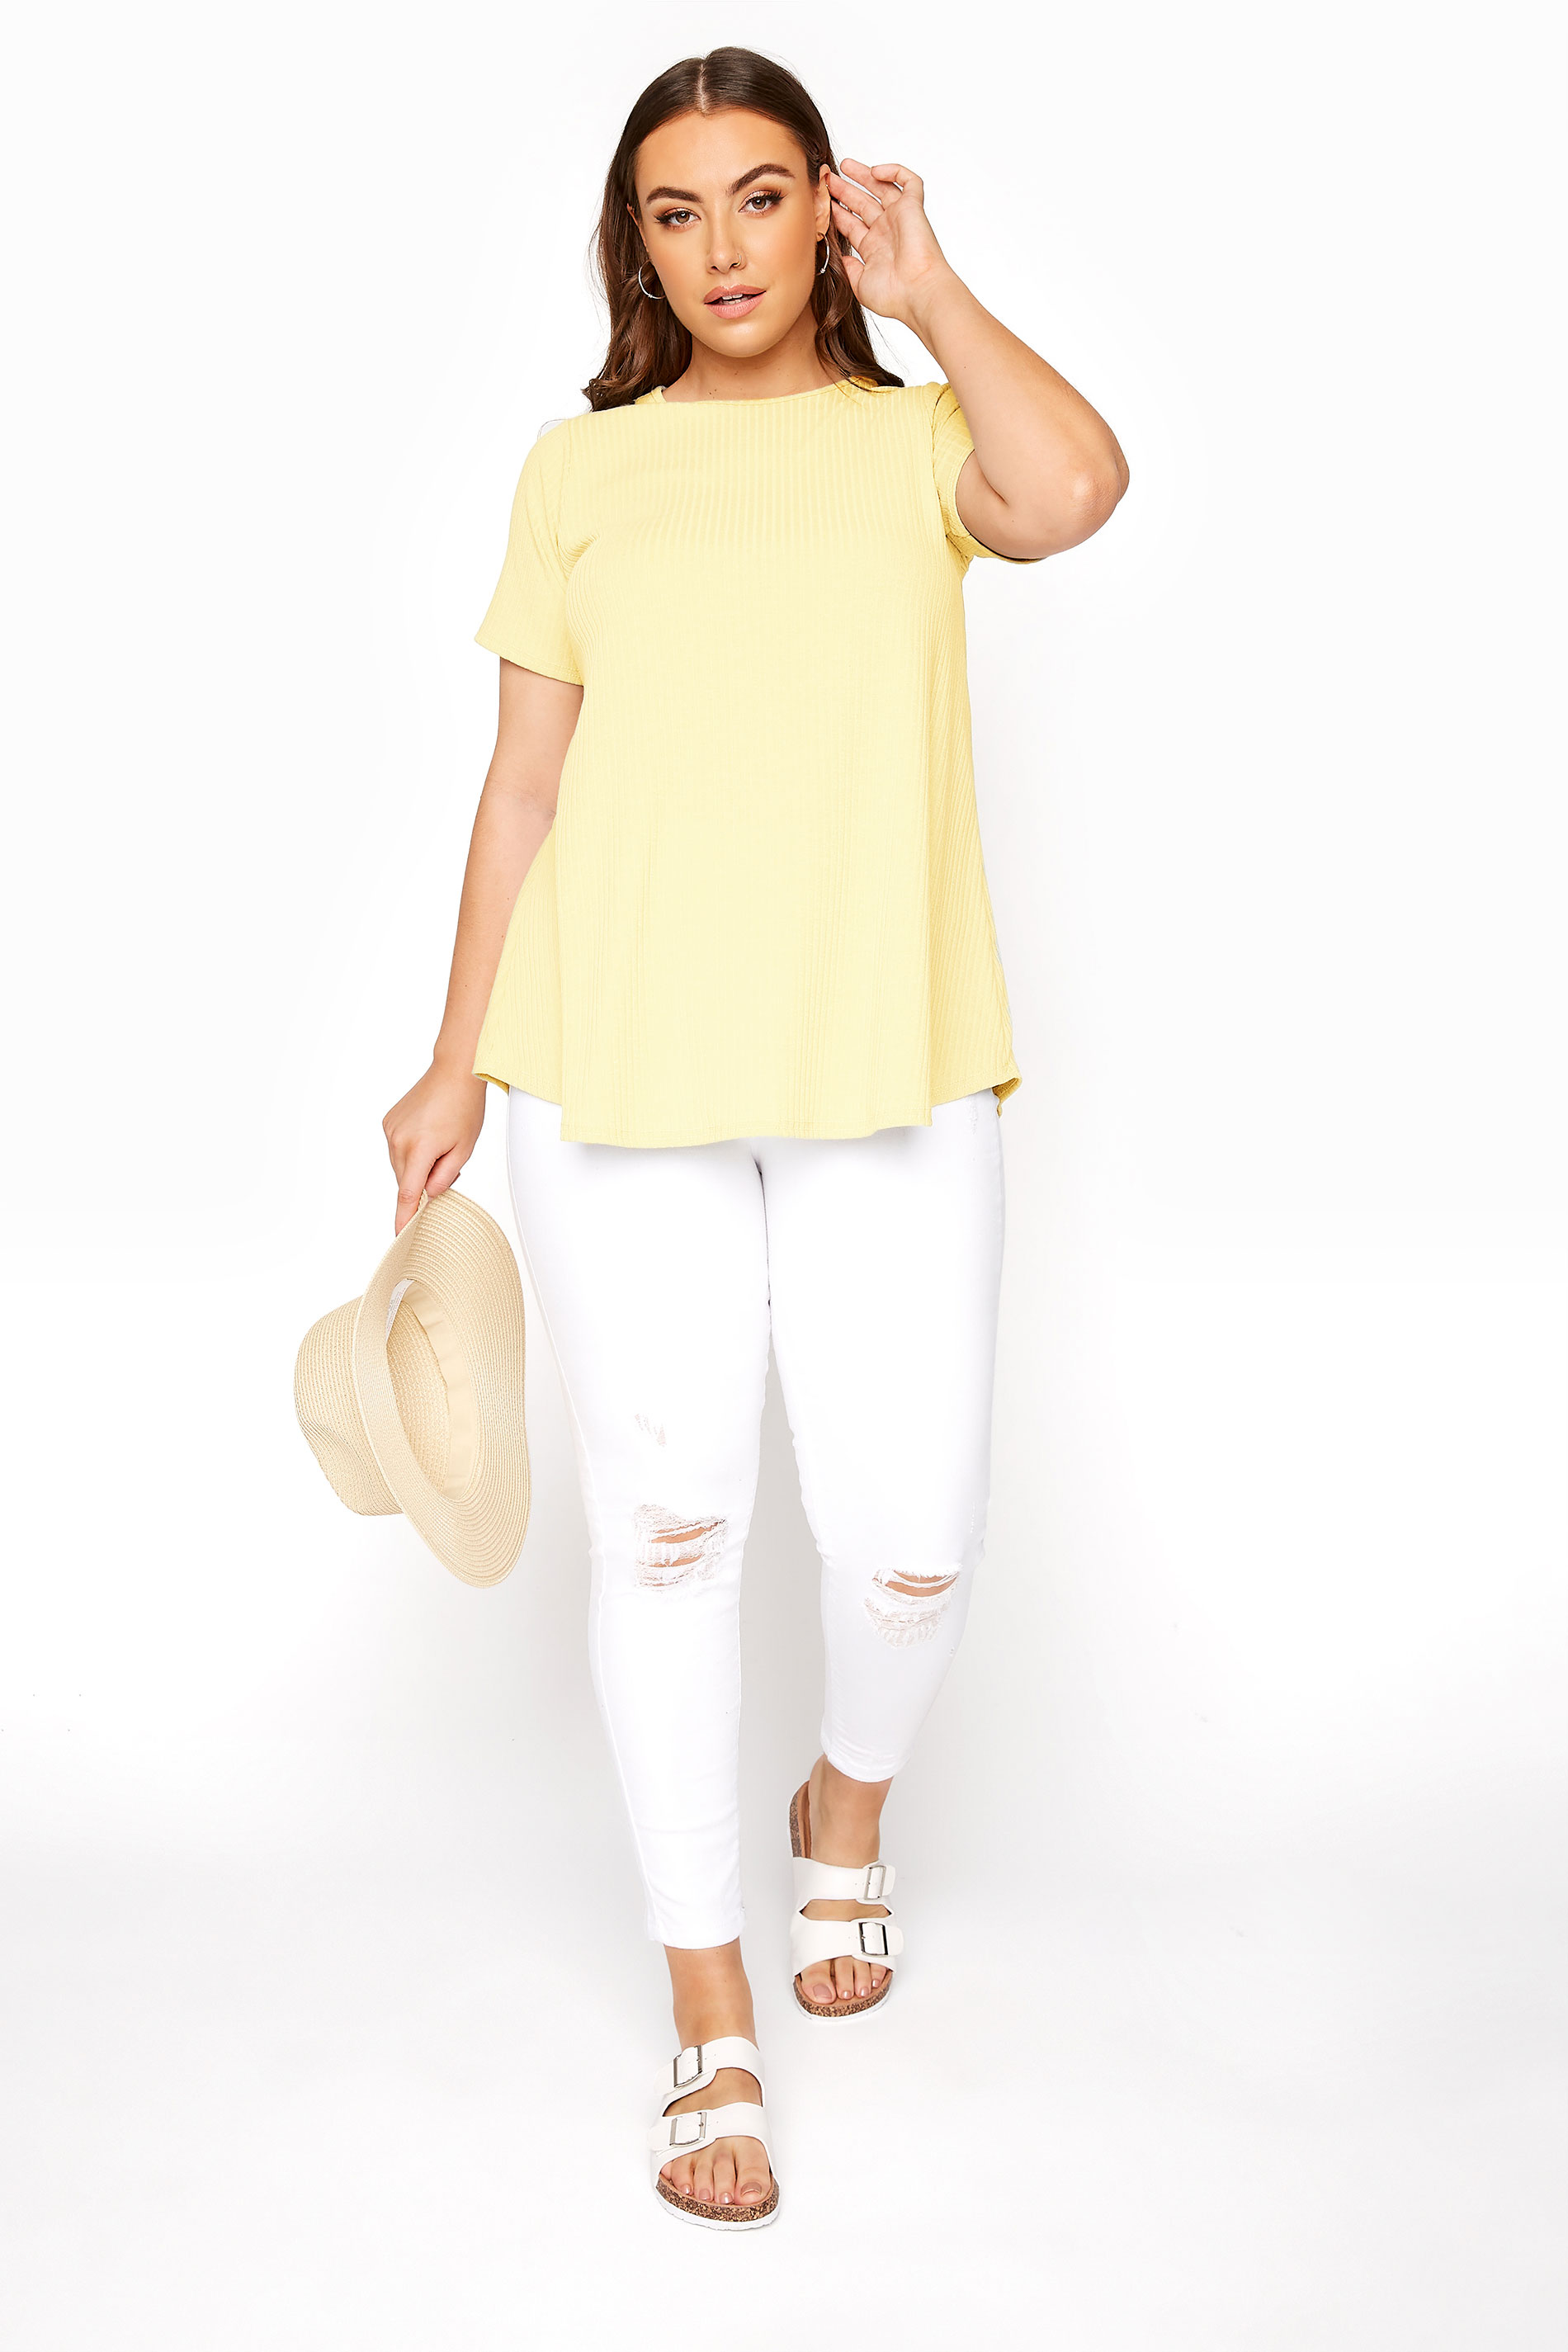 LIMITED COLLECTION Lemon Yellow Ribbed Swing T-Shirt